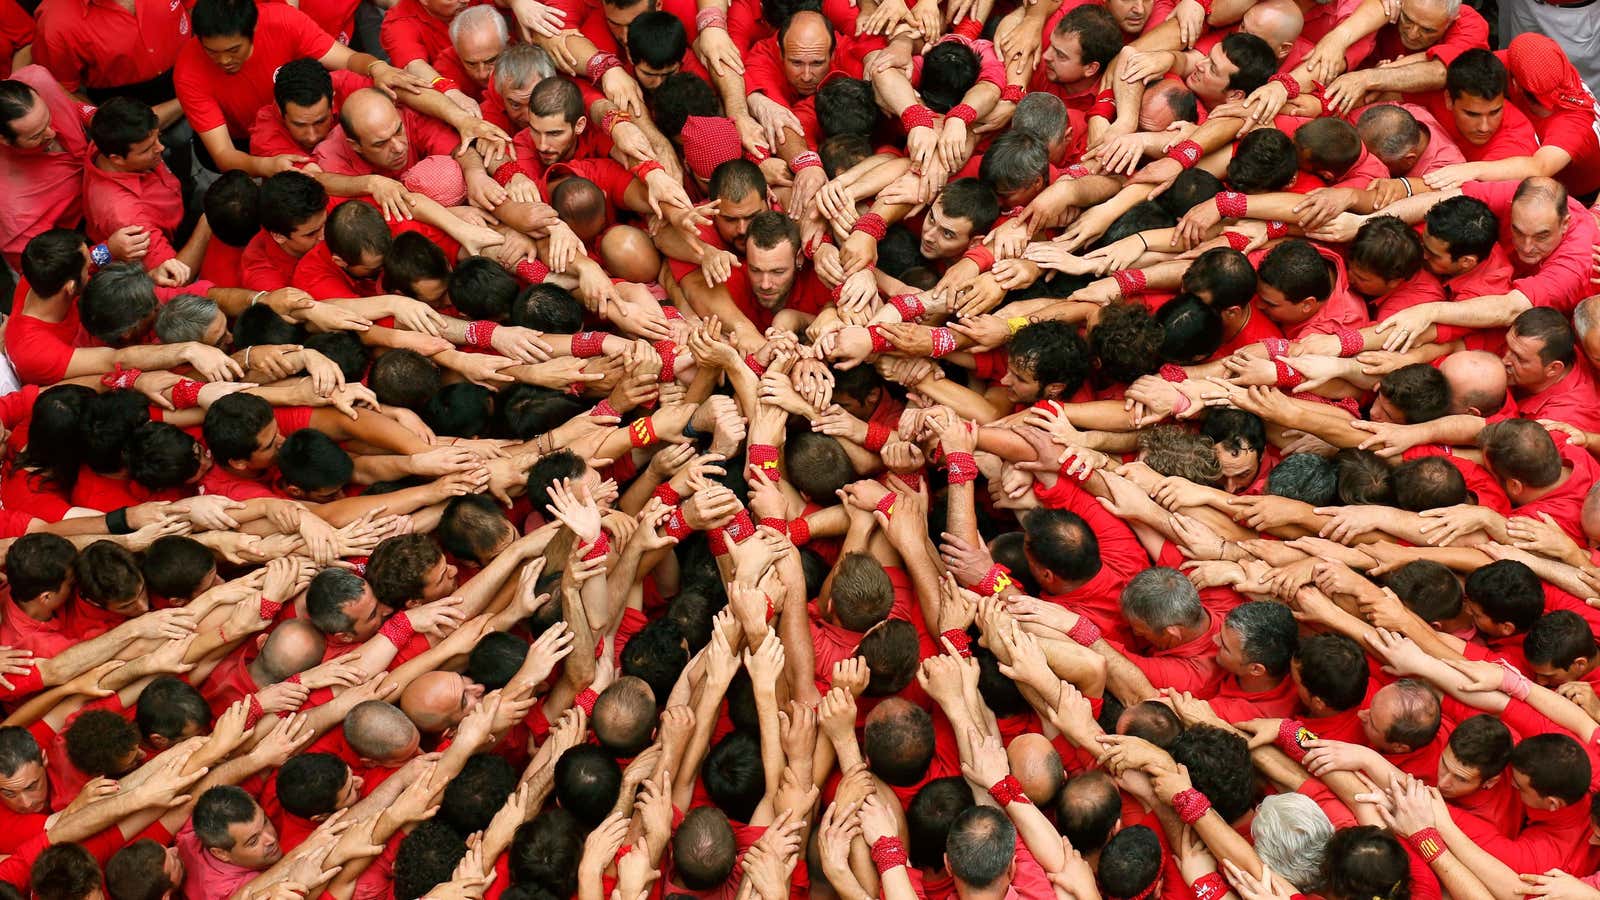 Castellers Colla Joves Xiquets de Valls start to form a human tower called “castells” during the Sant Joan festival at Plaza del Blat square in…